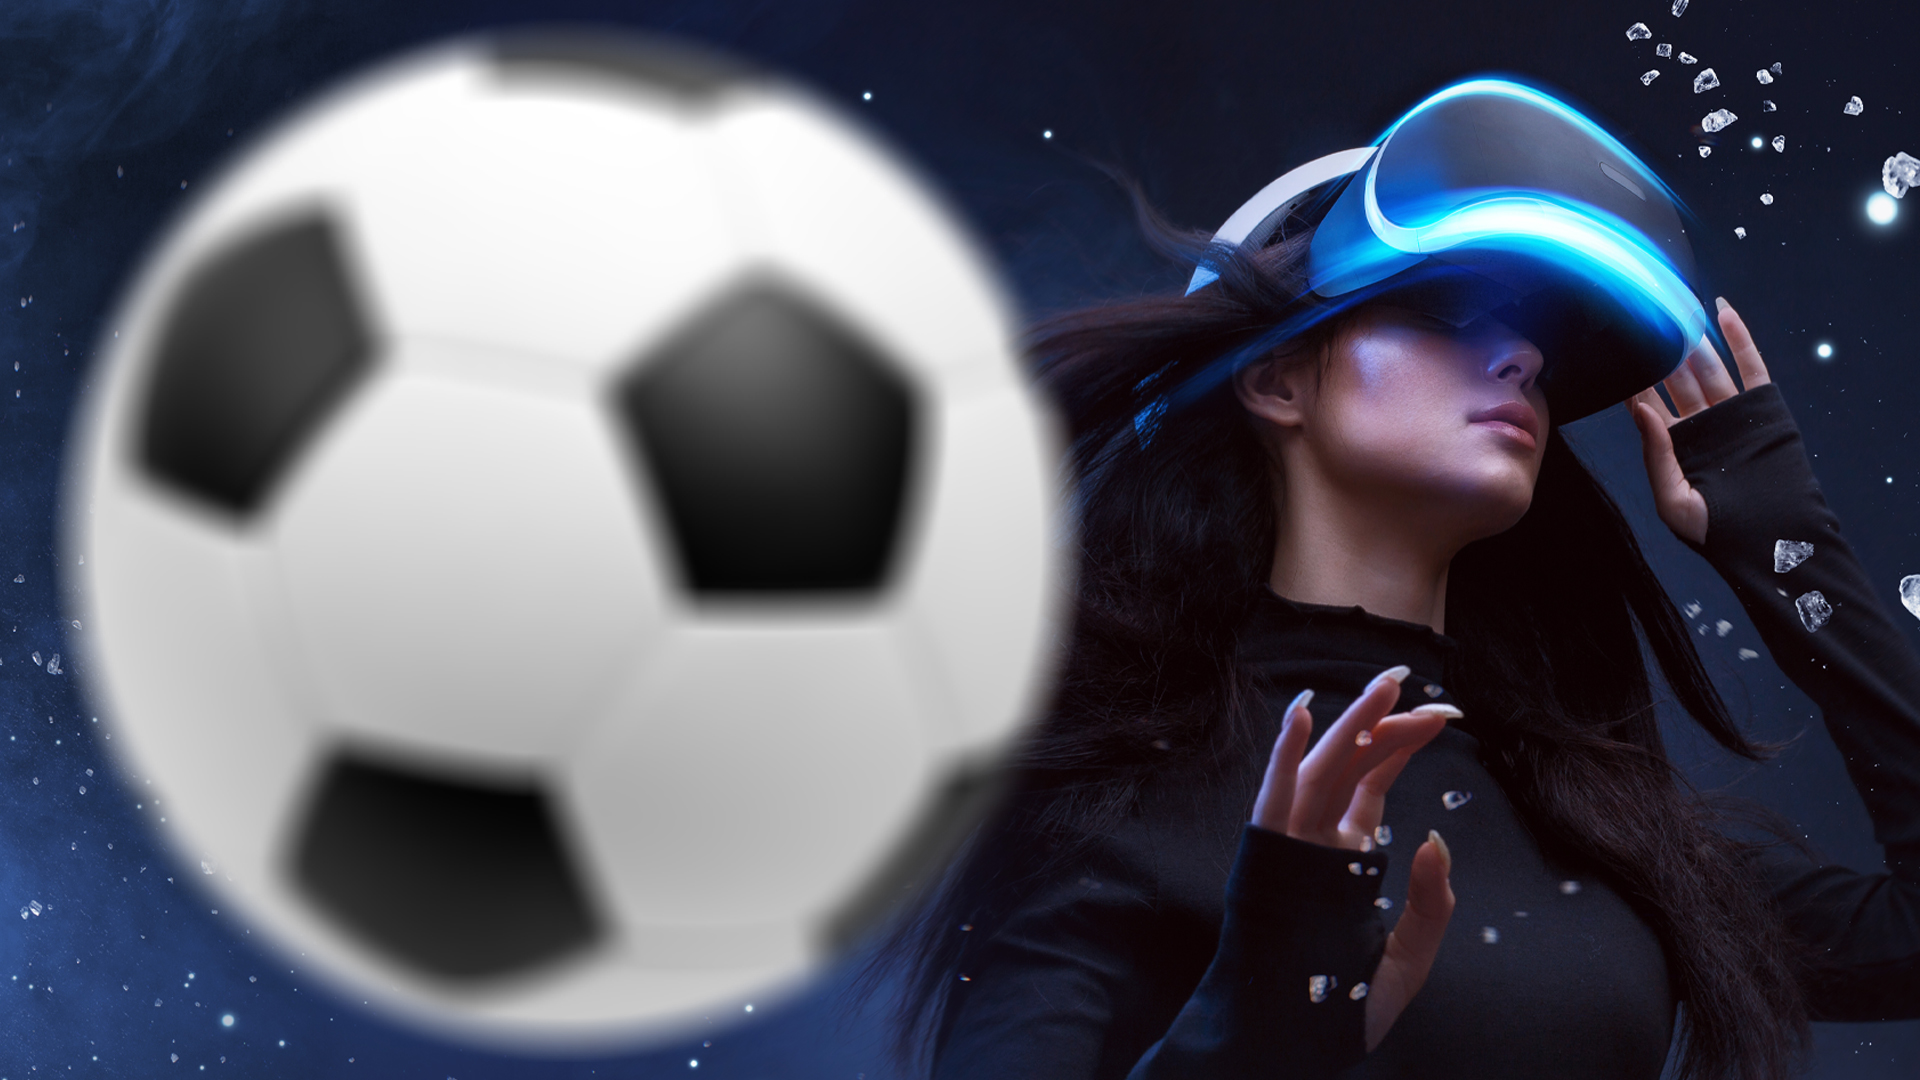 A person in a VR headset and a football